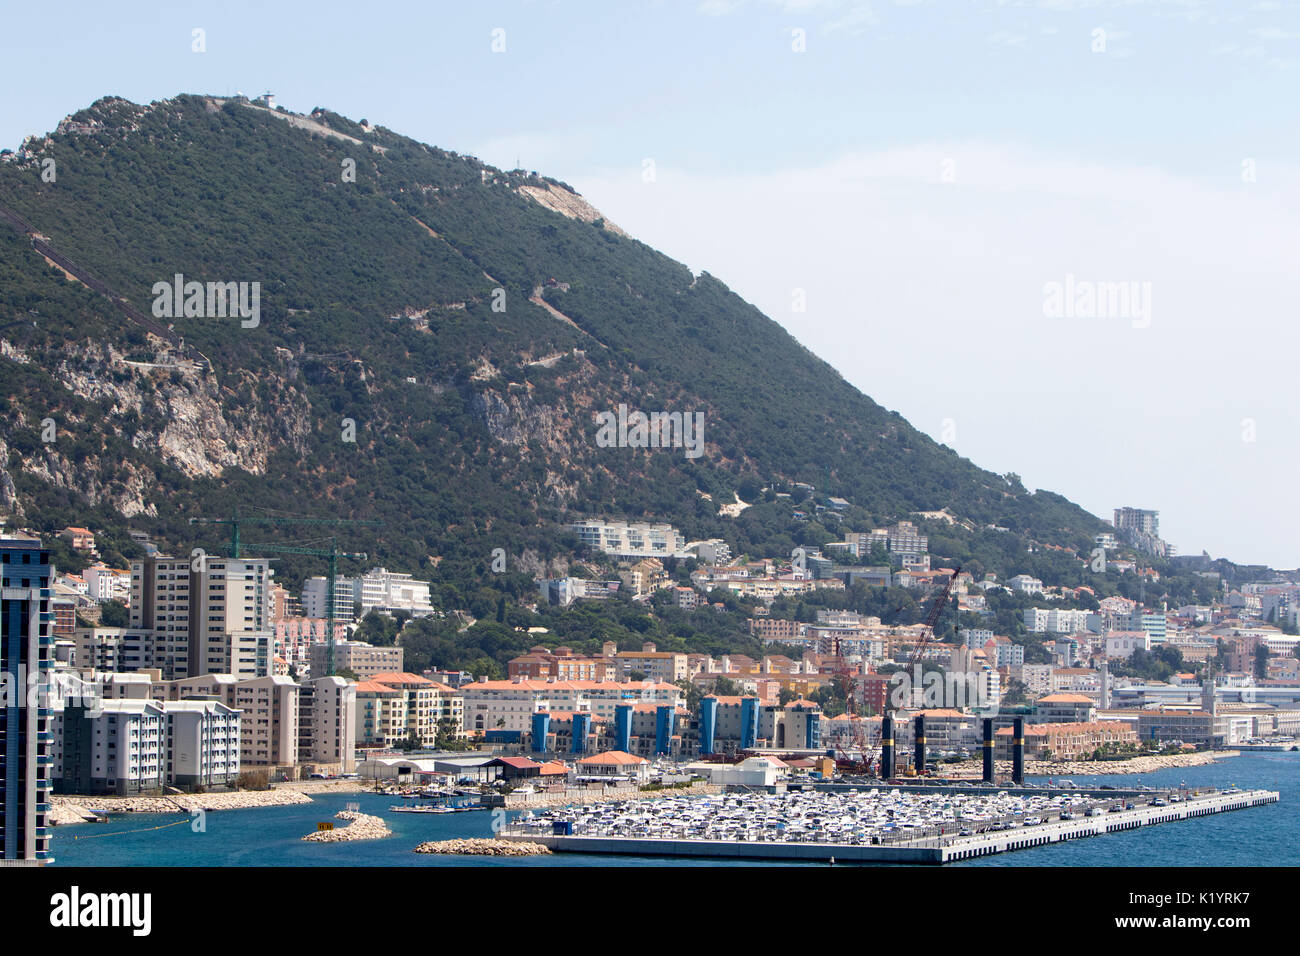 The Rock of Gibraltar monolithic limestone promontory located in British overseas territory of Gibraltar on the Iberian Peninsula Stock Photo